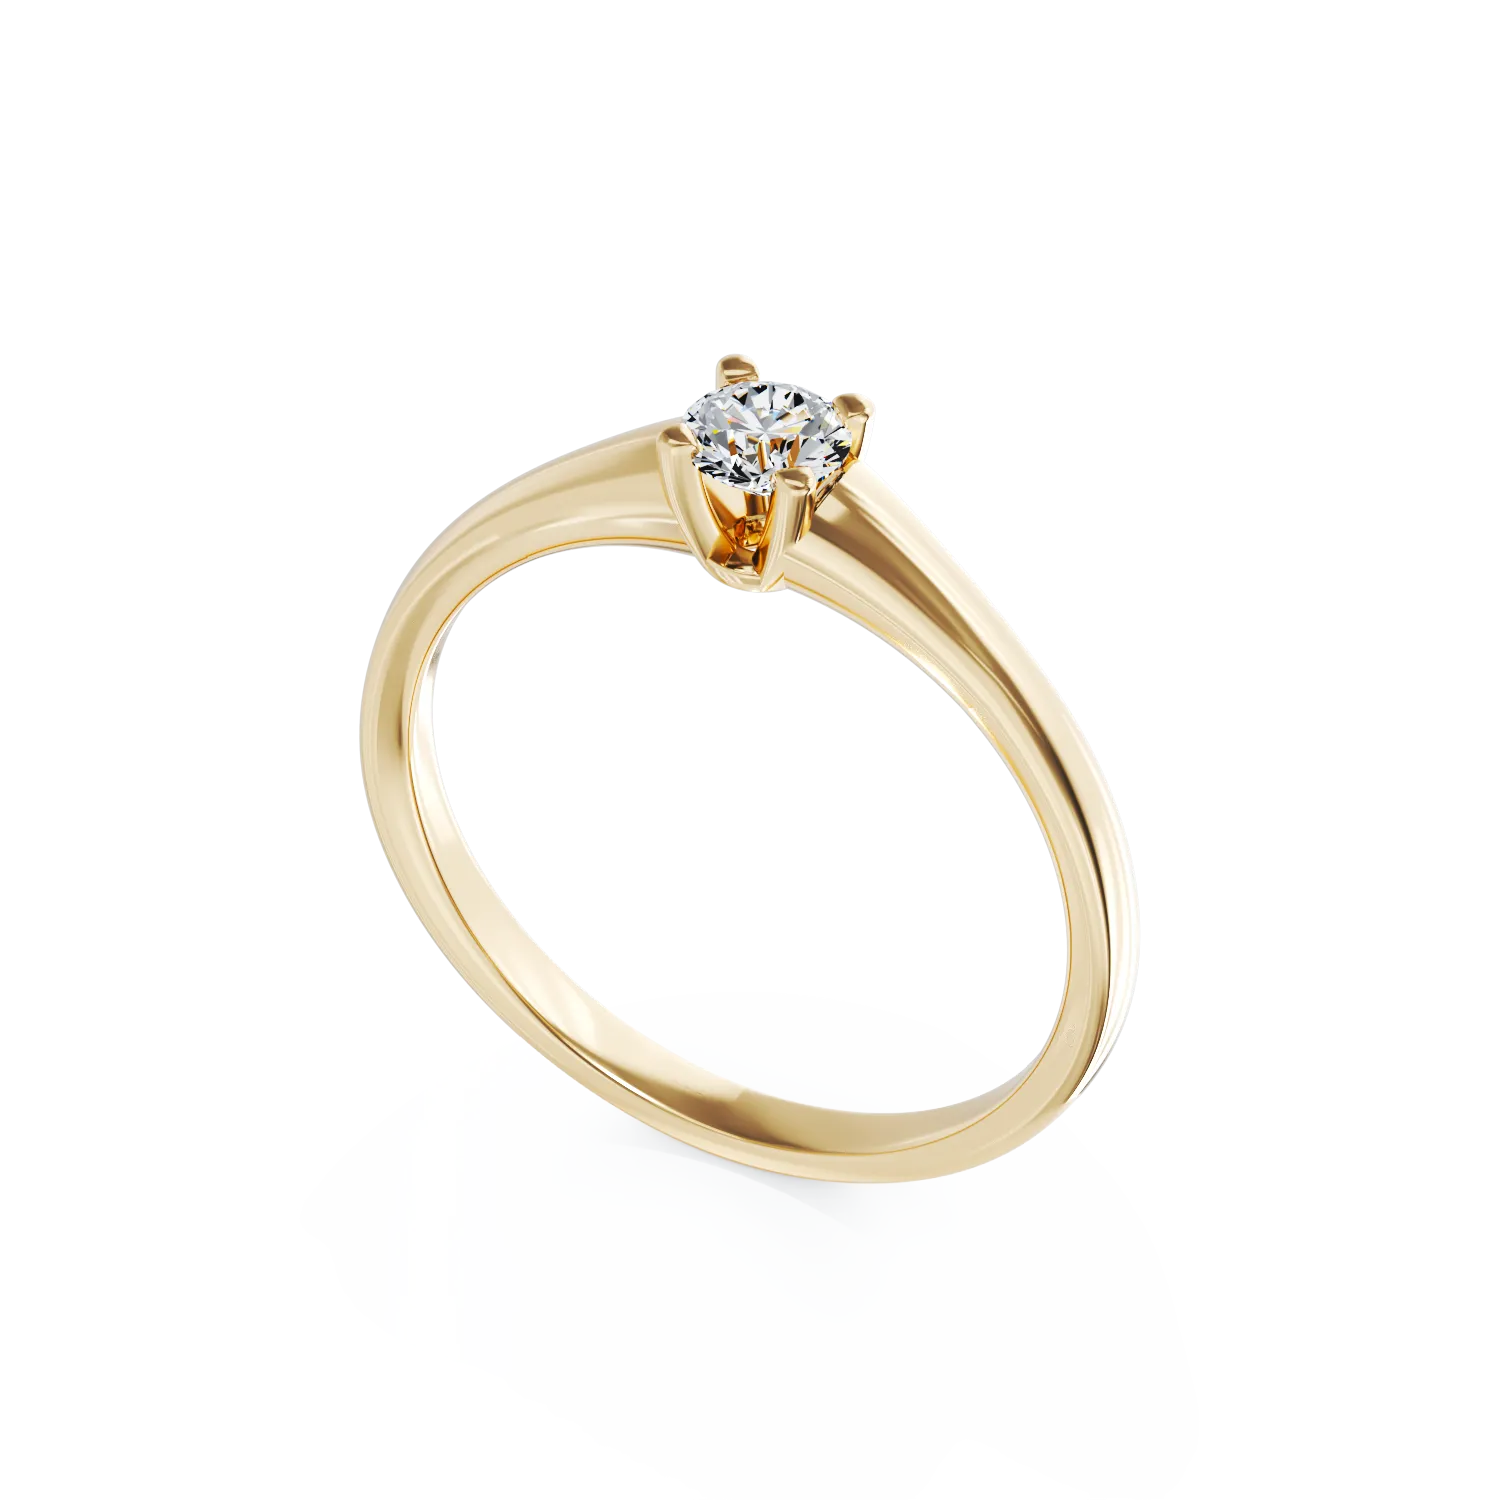 18K yellow gold engagement ring with a 0.145ct solitaire diamond